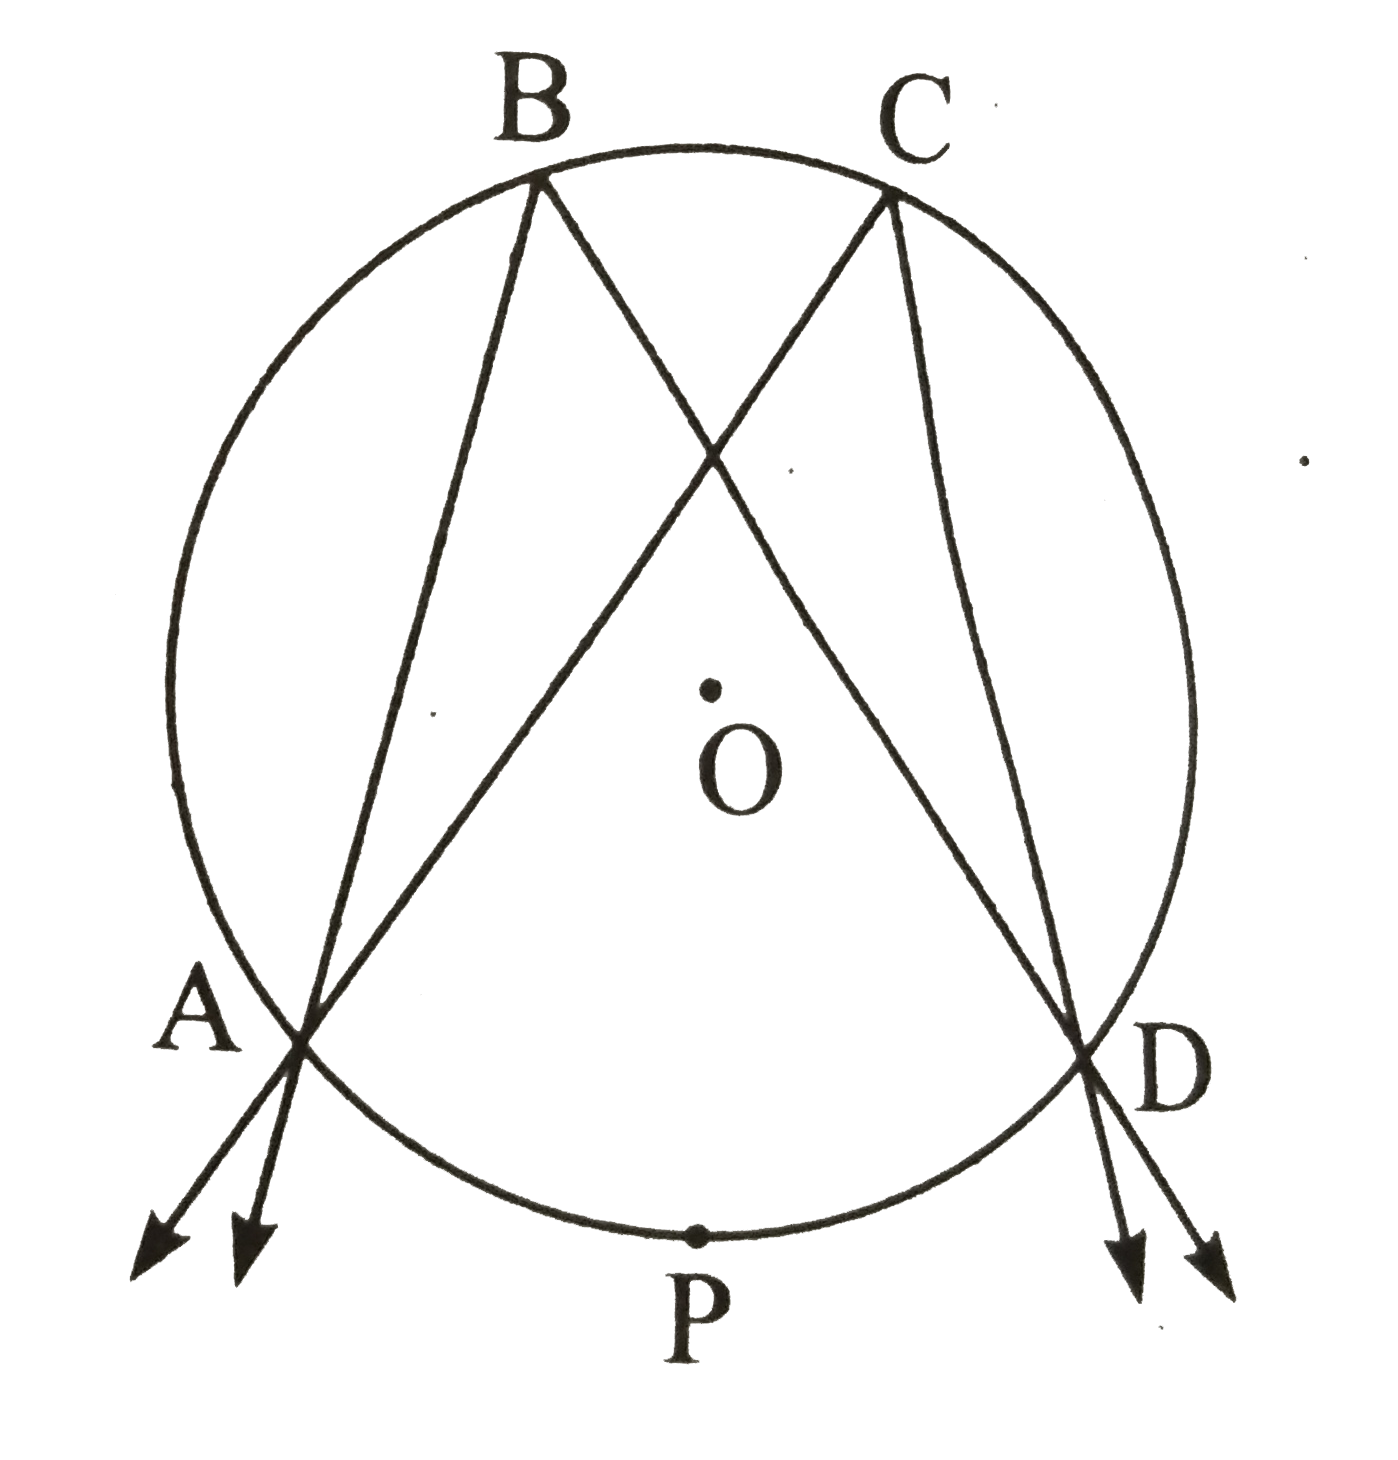 Corollaries of inscribed angle theorem :     Angle inscribed in the same arc arc contruent   Given : (1) A circle with centre O   (2) /ABD and /ACD  are inscribed in arc ABC   and intercepts arc APD.   To prove : /ABD ~= /ACD